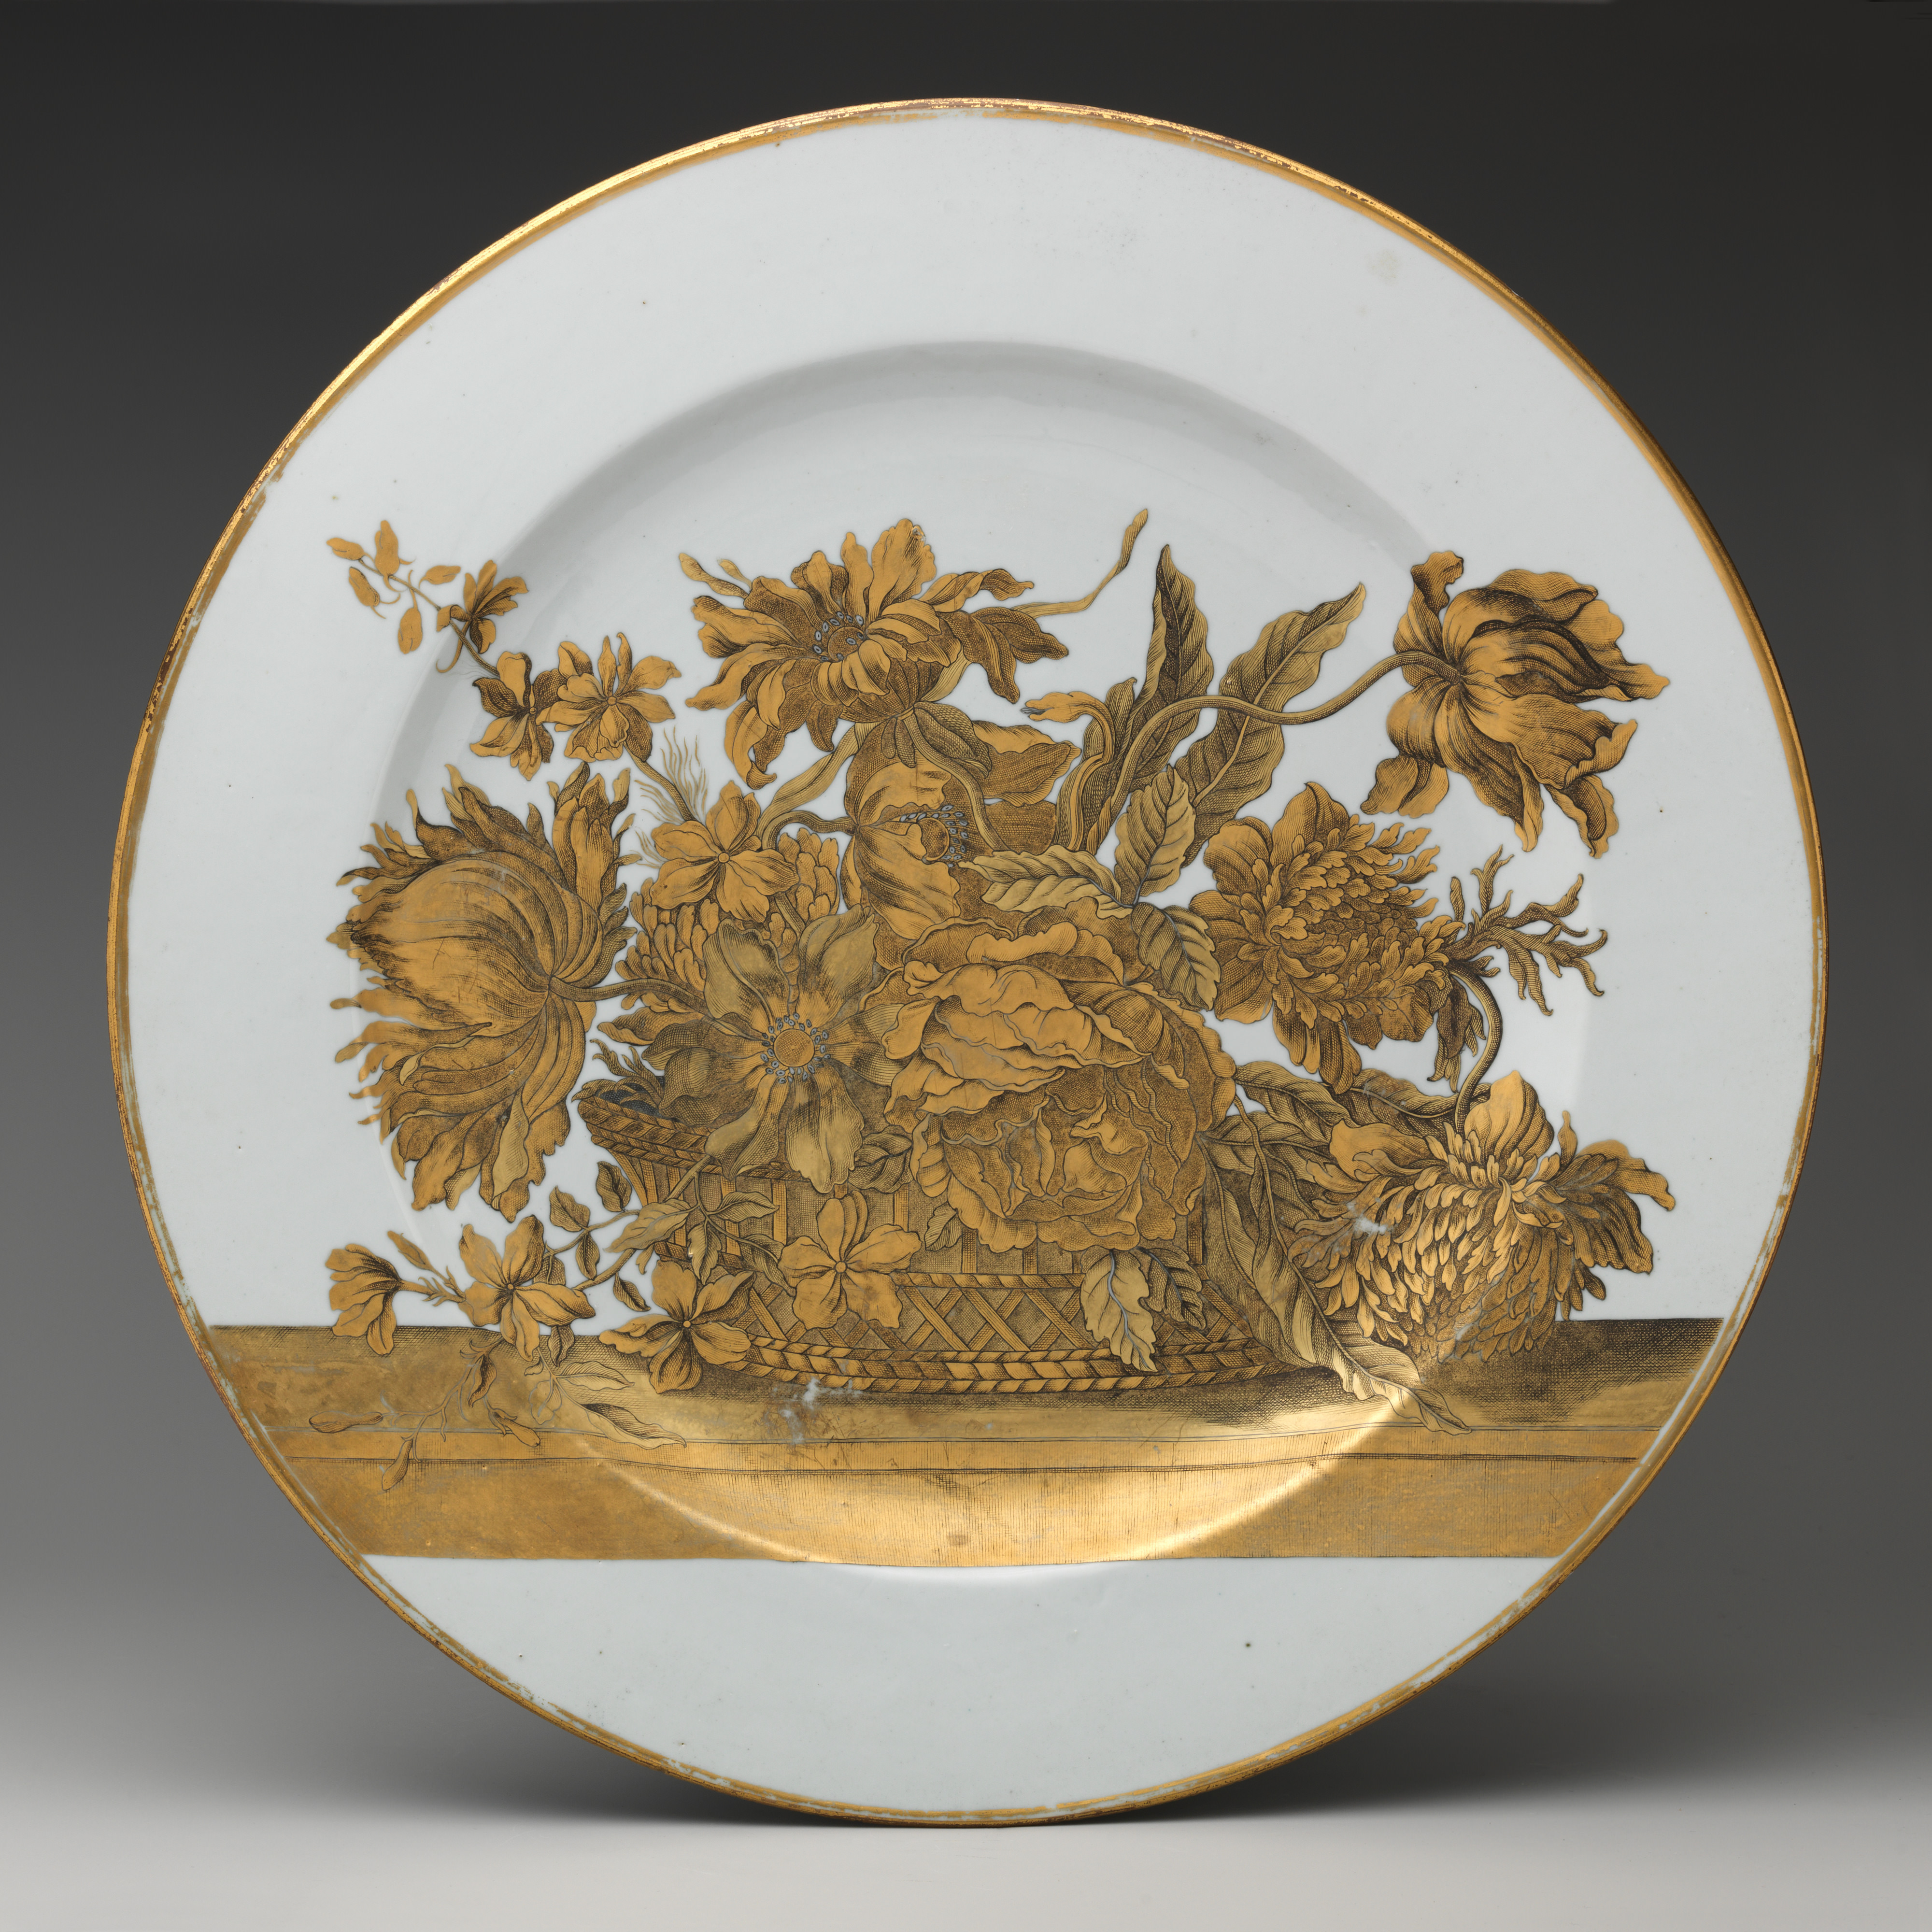 circa 1735–1740, hard-paste porcelain with gilding, 4.8 × 38.7 cm. Collection of The Metropolitan Museum of Art, New York (62.187.1).